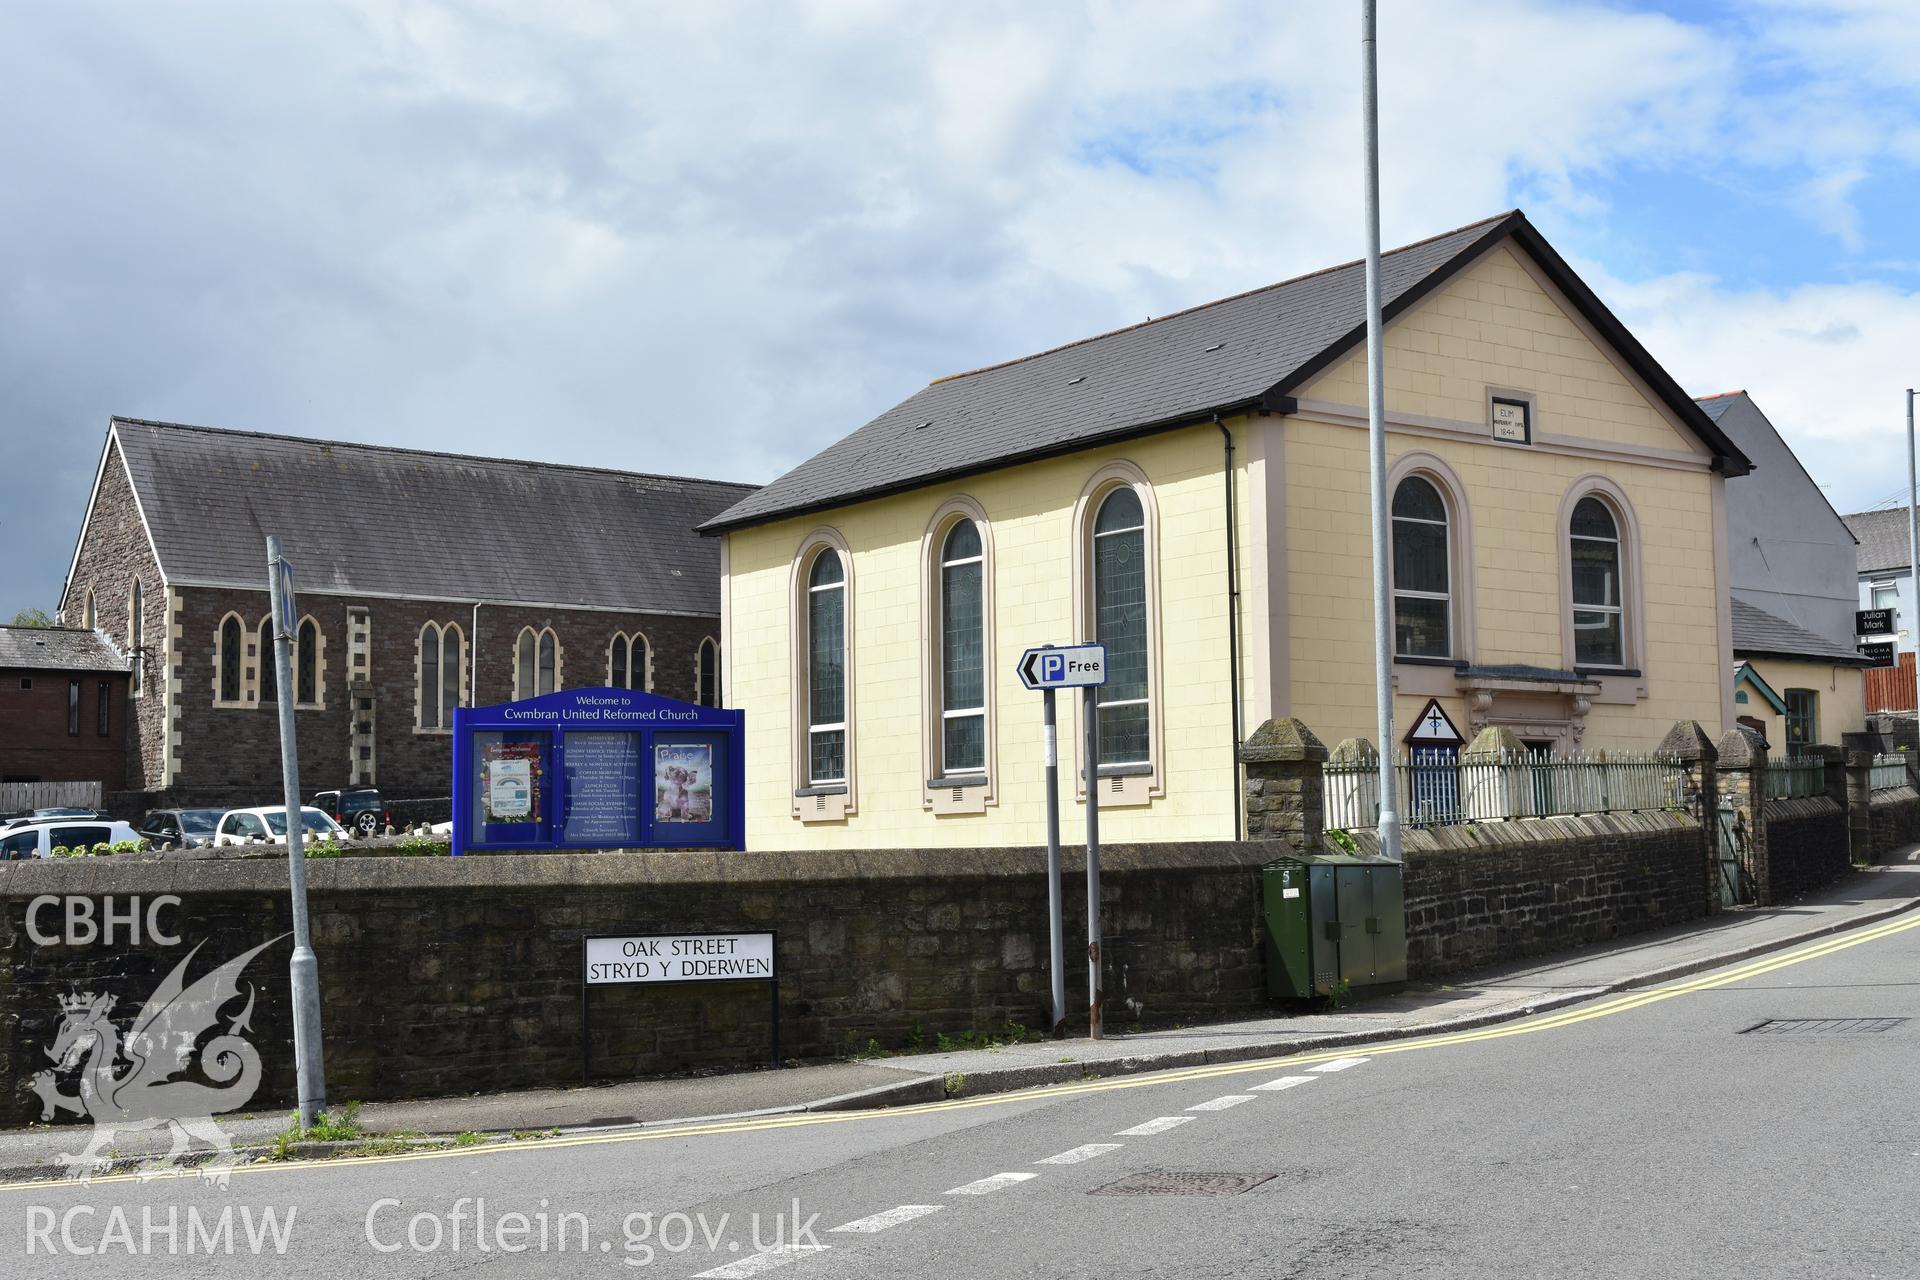 Exterior view showing Elim Independent Chapel (now United Reform Church) in the Oakfield area of Cwmbran. Photographed by Susan Fielding of RCAHMW on 25 May 2021.